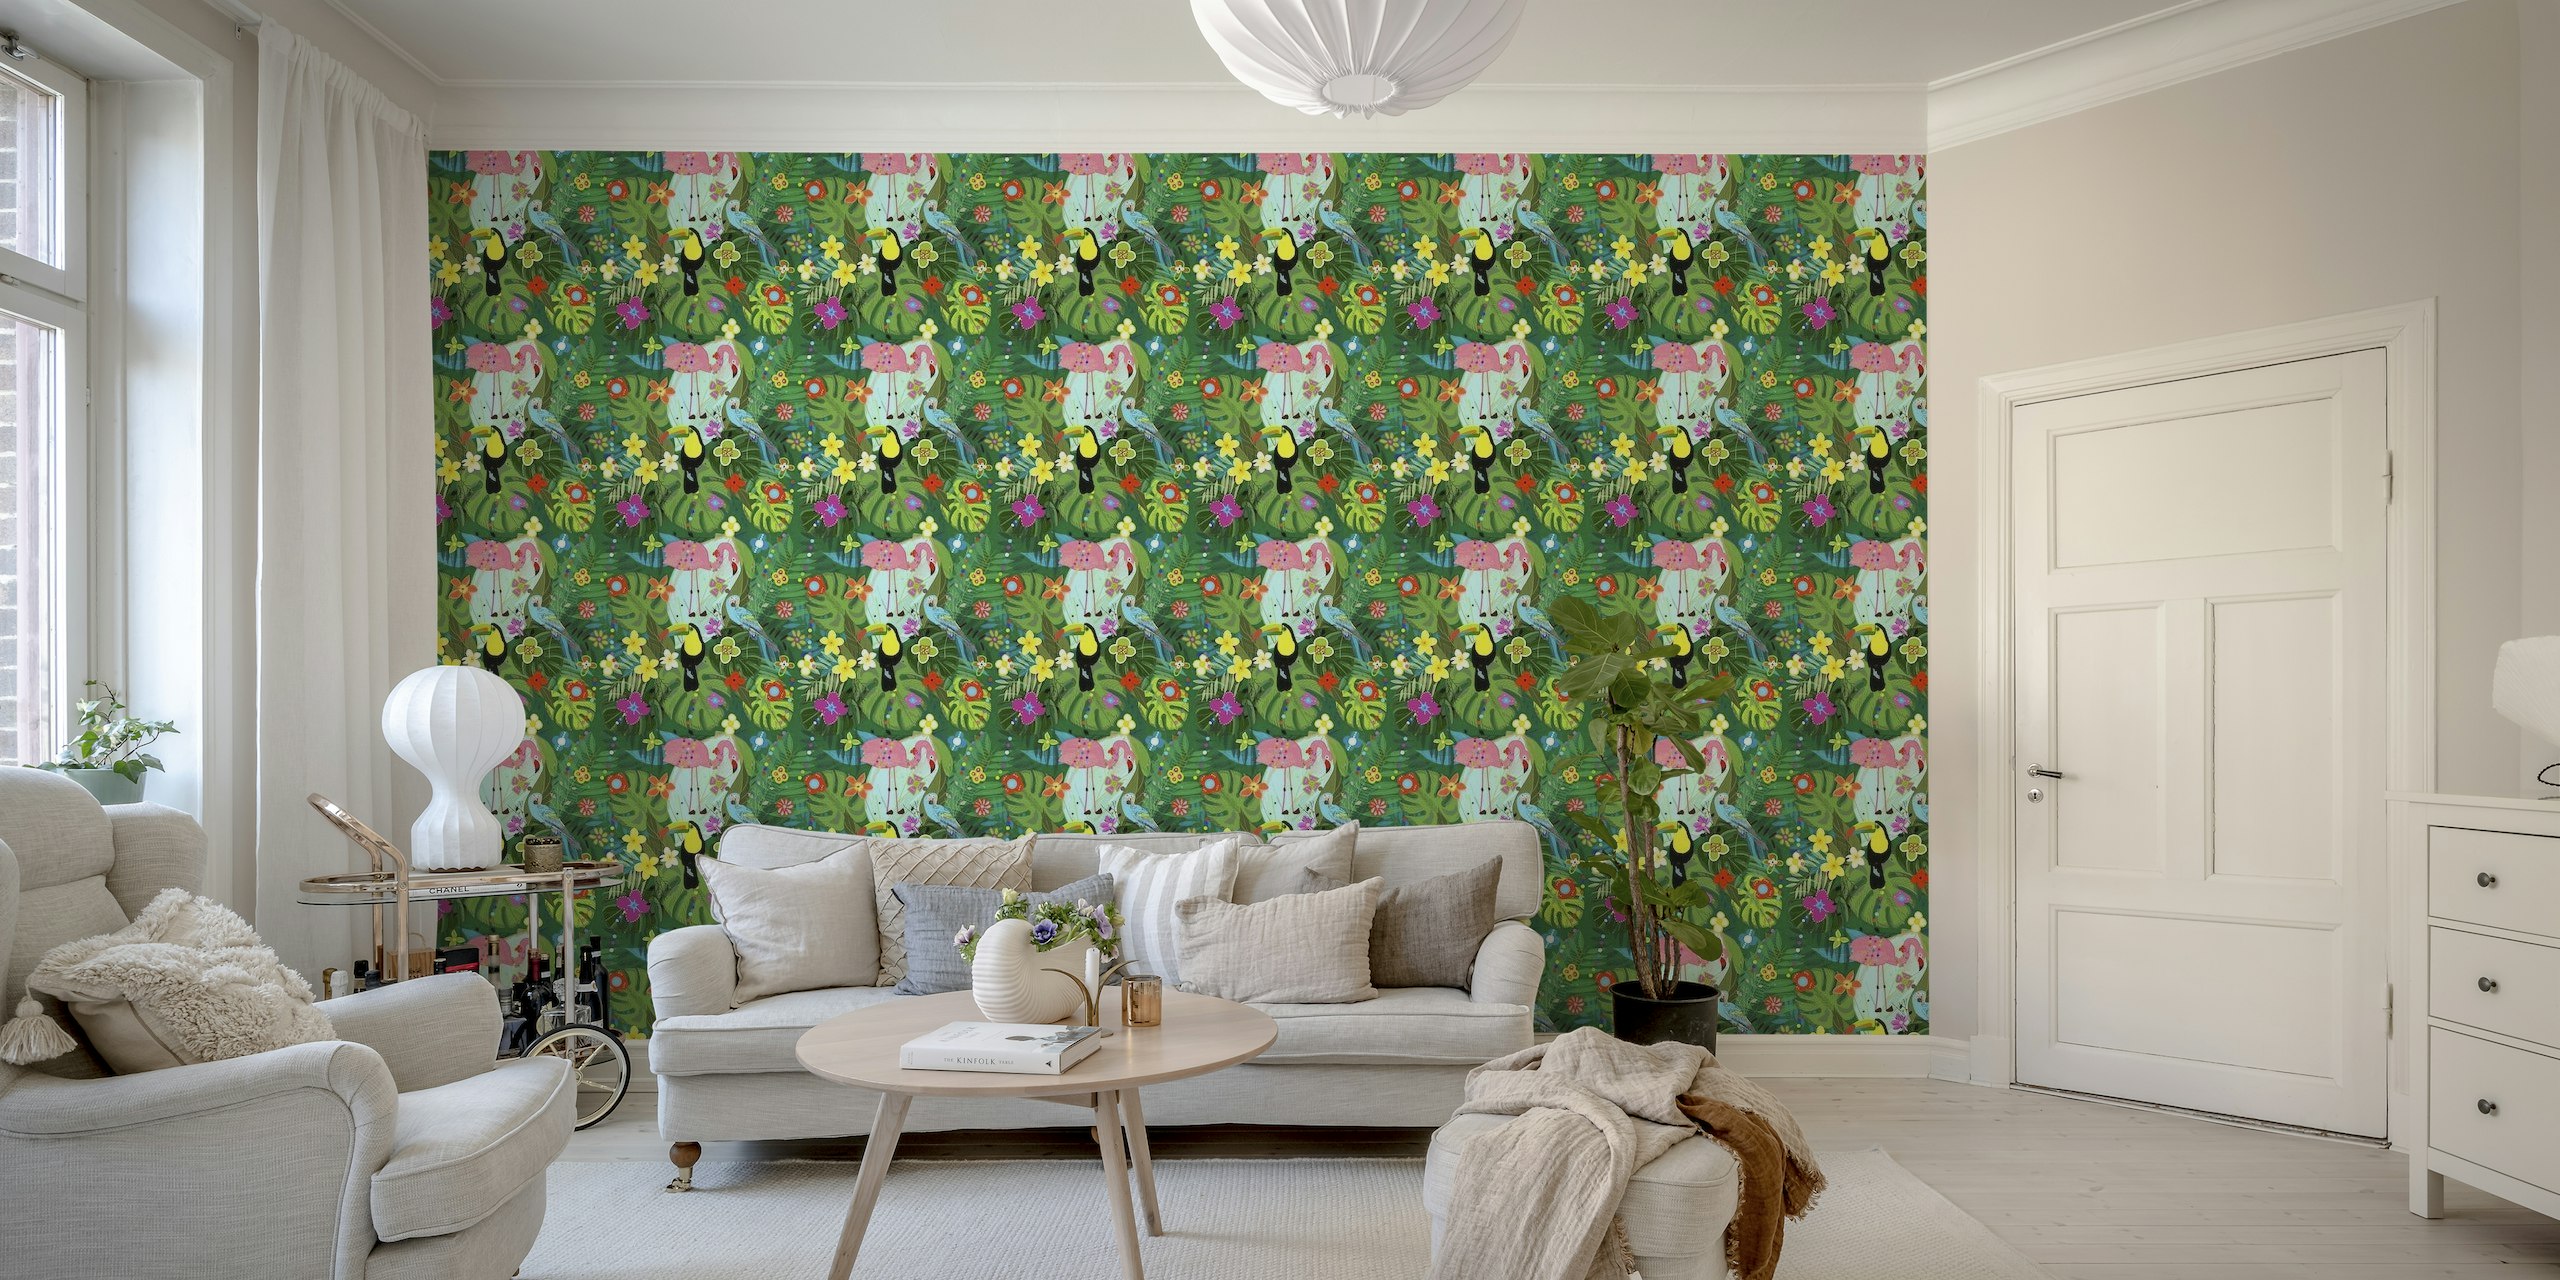 Colorful tropical flowers and birds wall mural on a green background